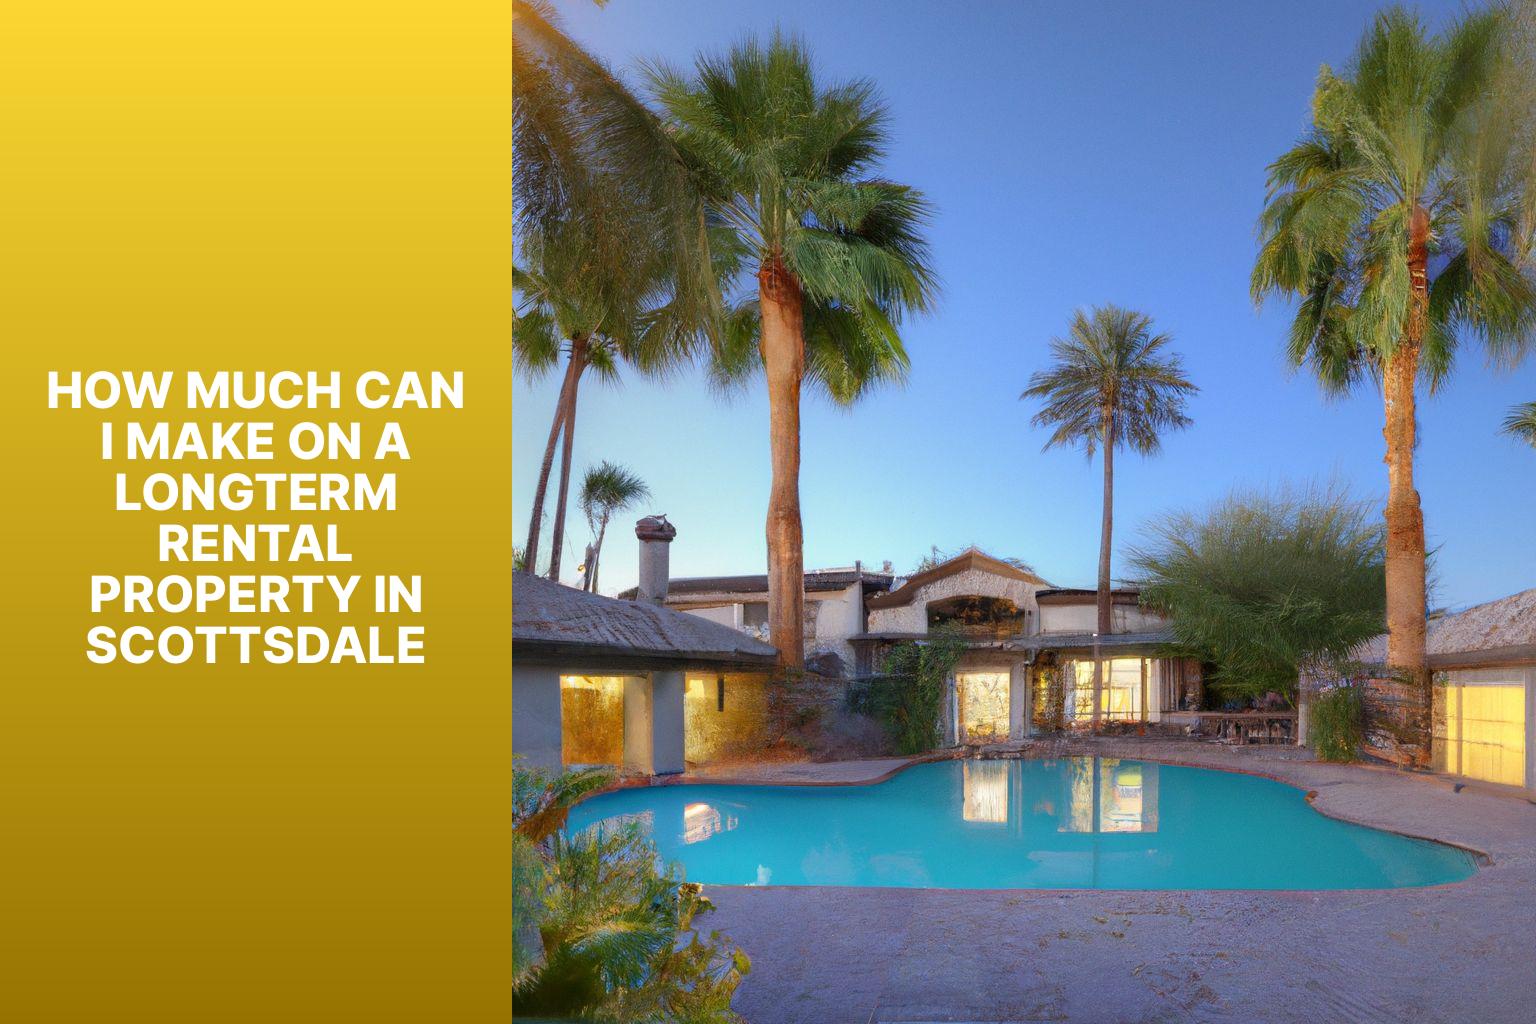 How much can I make on a longterm rental property in Scottsdale